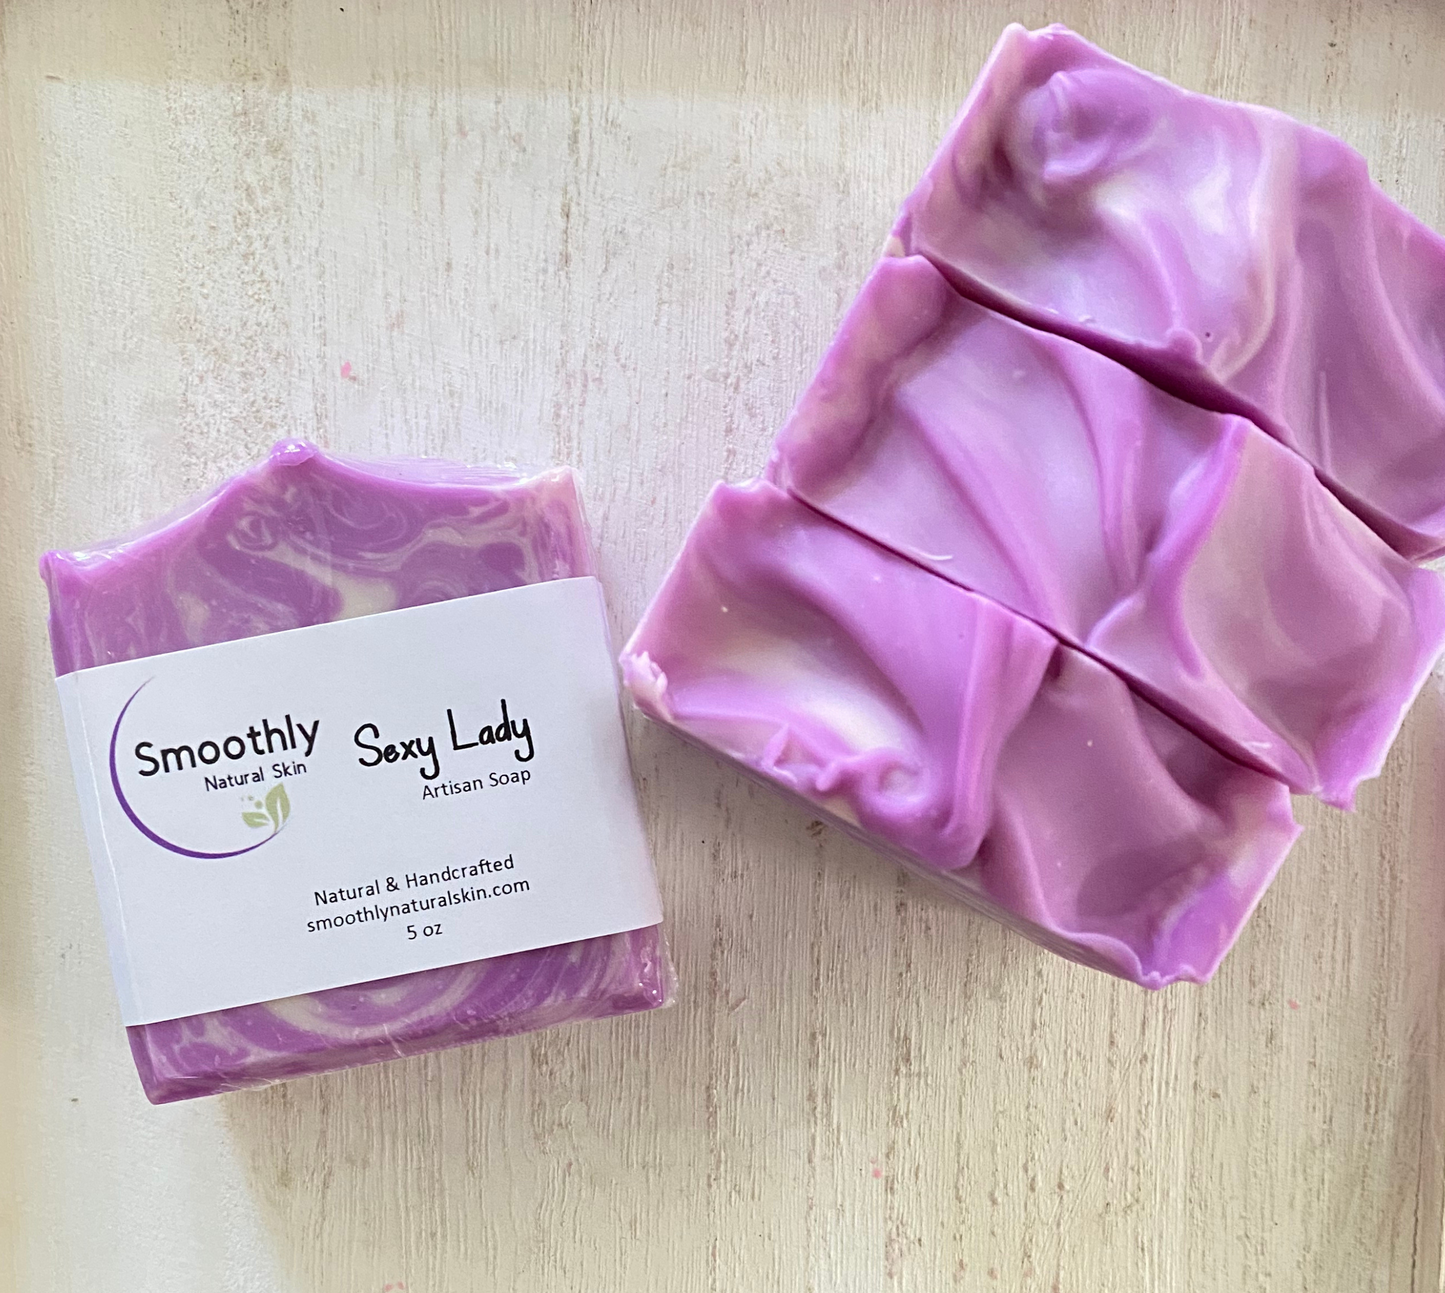 Sexy Lady is a great scent. I love it; is smells feminine, clean and fresh. Smells just like VS Very Sexy perfume. This fragrance is a blend orchid, jasmine, freesia, musks and sandalwood. Smoothly Natural Skin 